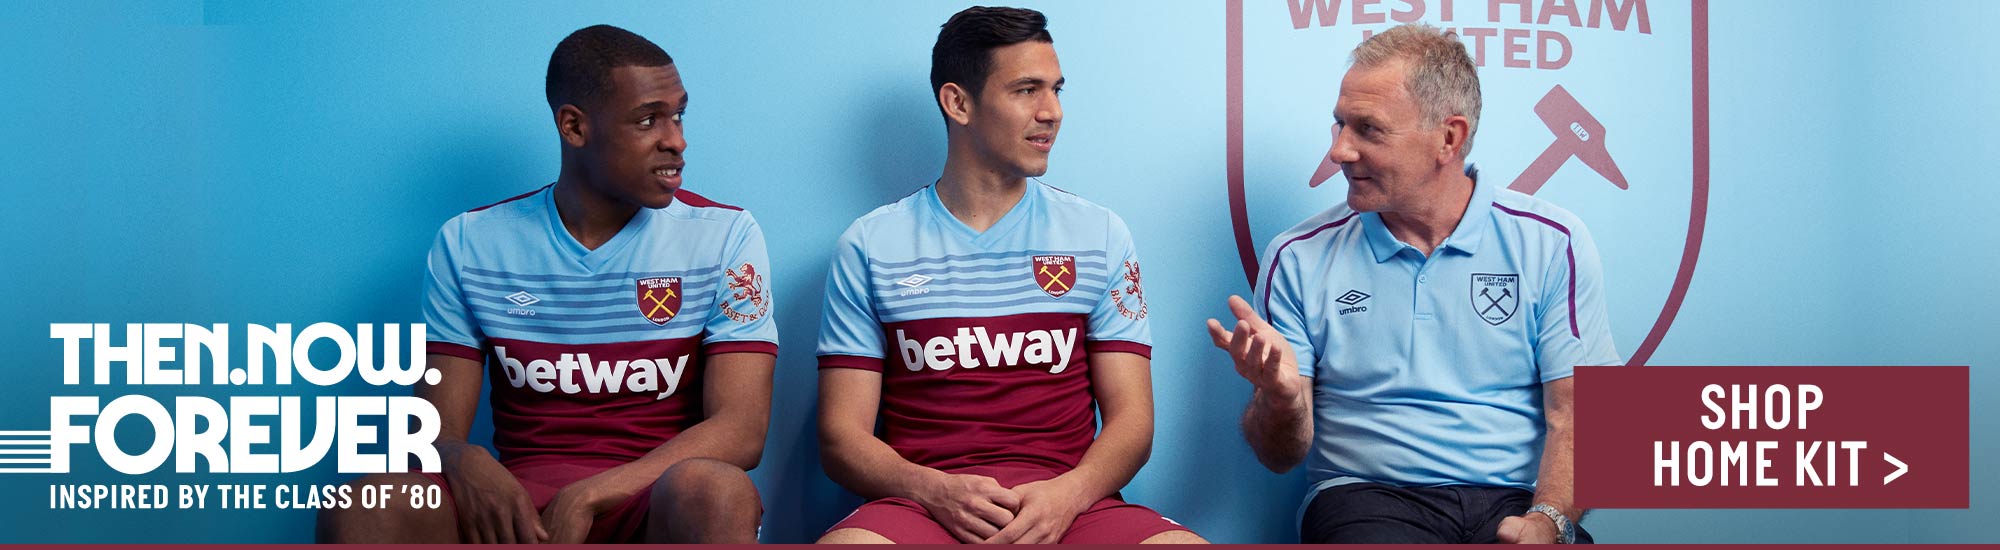 Buy home kit at the West Ham United store